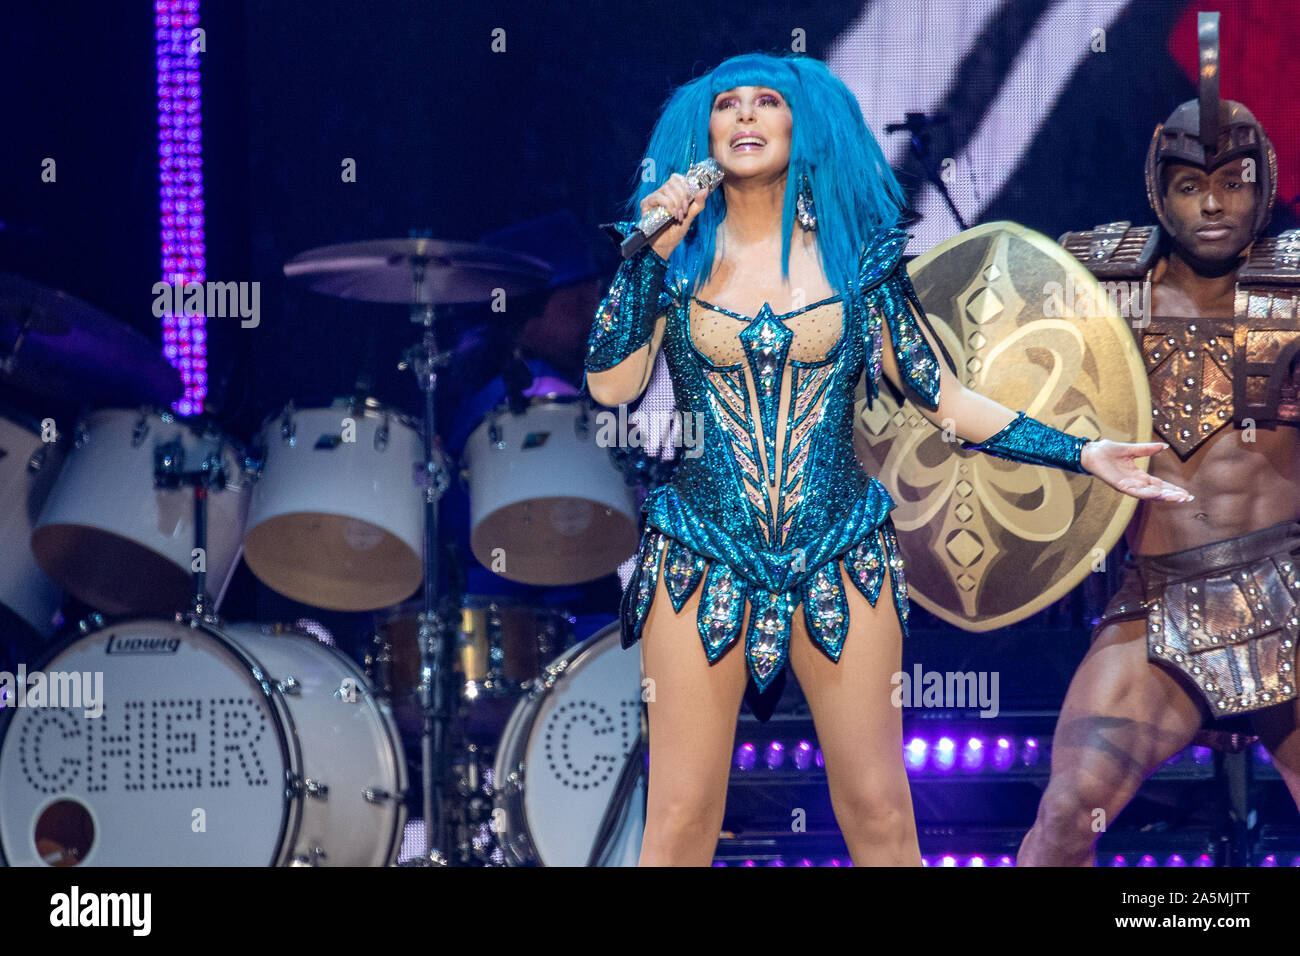 London, UK. 21 Oct 2019, Cher performs on stage during the Here We Go Again Tour at the O2 Arena   Jason Richardson/Alamy Live News Stock Photo